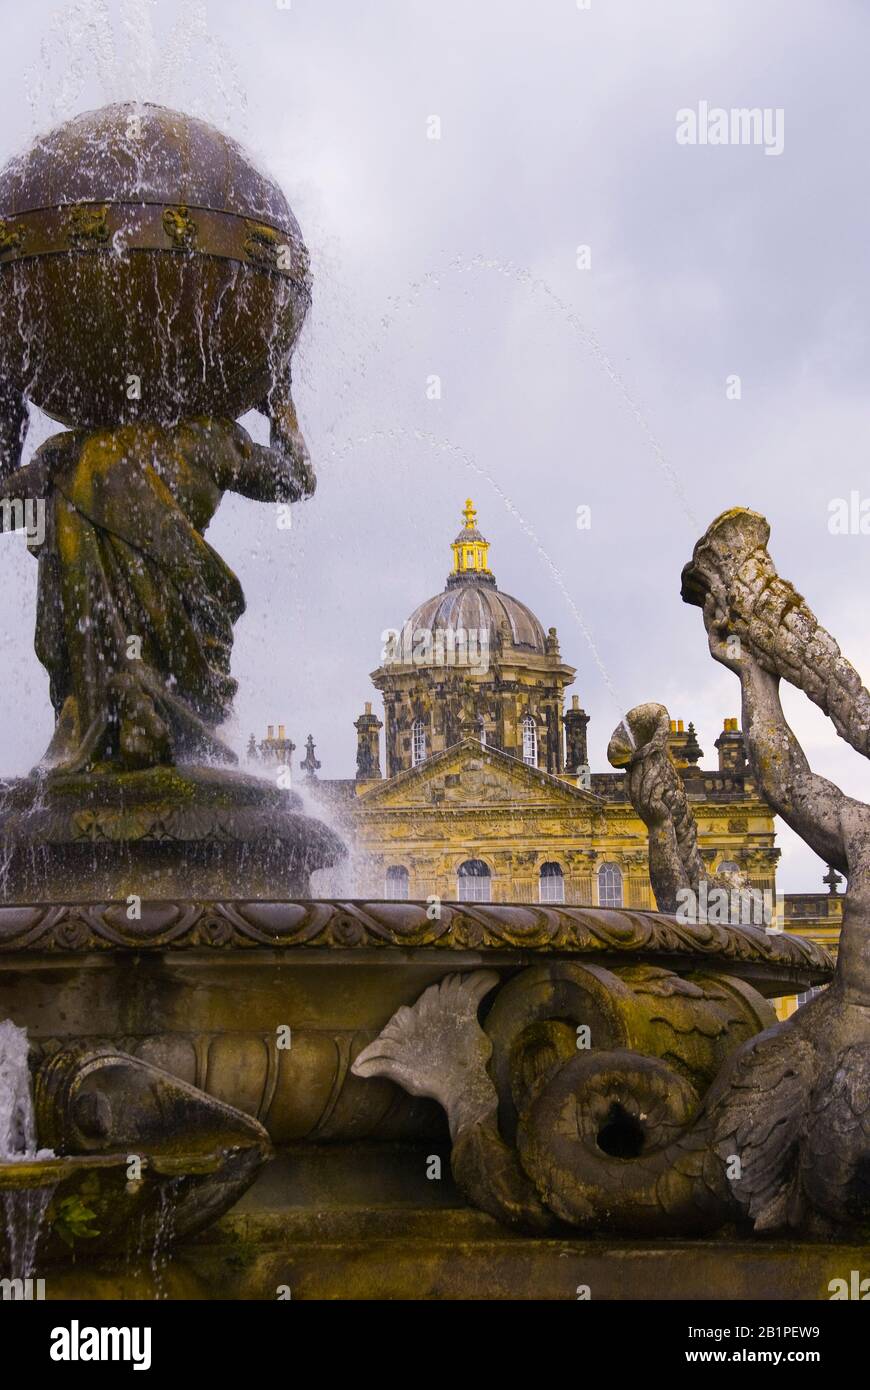 Castle Howard, the inspiration for the movie Brideshead Revisited, York, UK Stock Photo